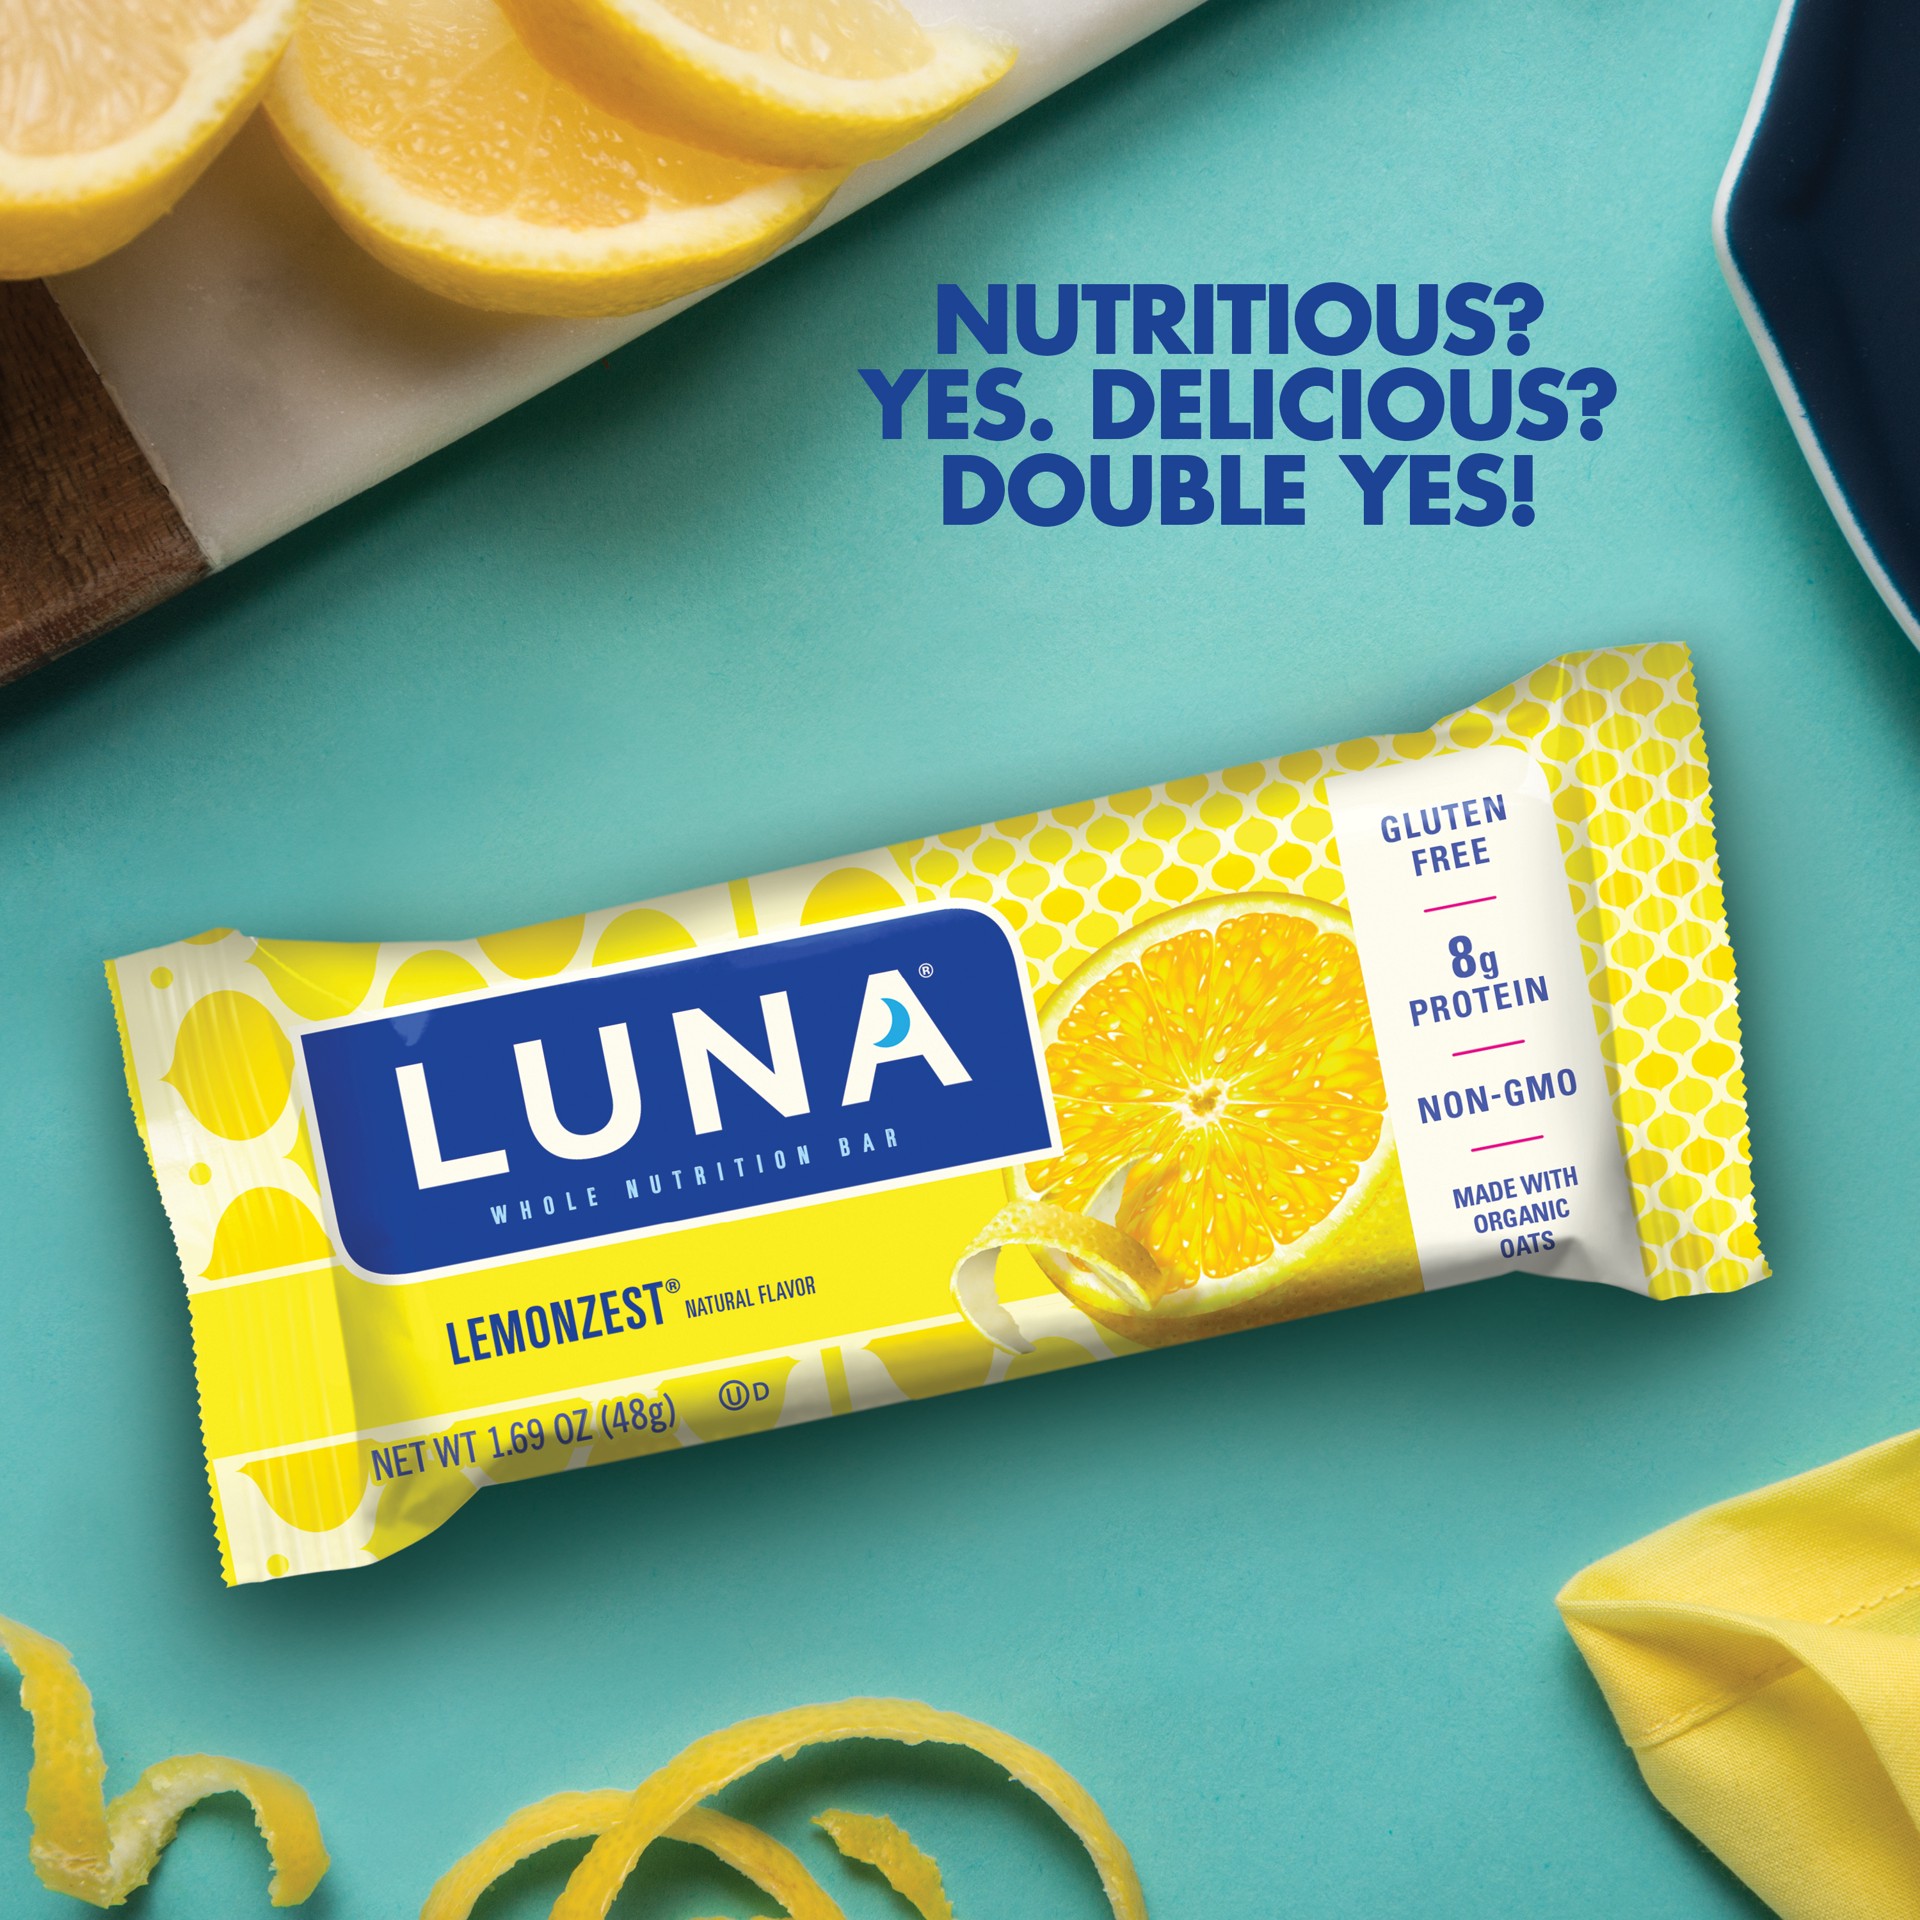 slide 3 of 7, LUNA Bar - LemonZest Flavor - Gluten-Free - Non-GMO - 7-9g Protein - Made with Organic Oats - Low Glycemic - Whole Nutrition Snack Bars - 1.69 oz. (6 Pack), 6 ct; 1.69 oz